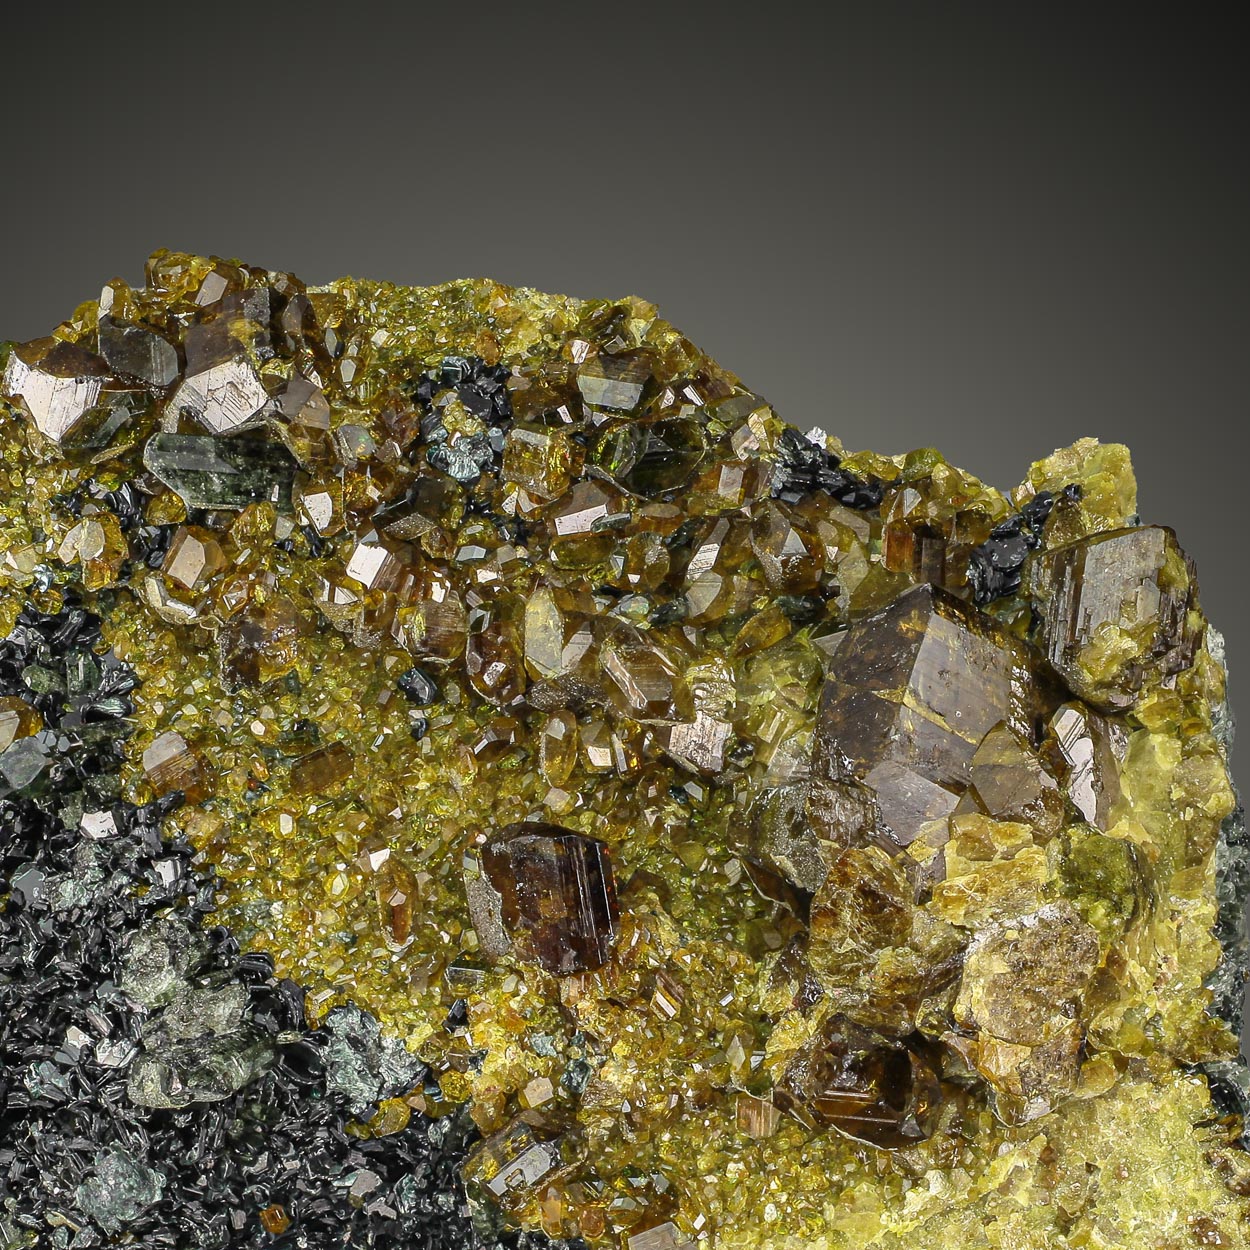 Diopside & Epidote